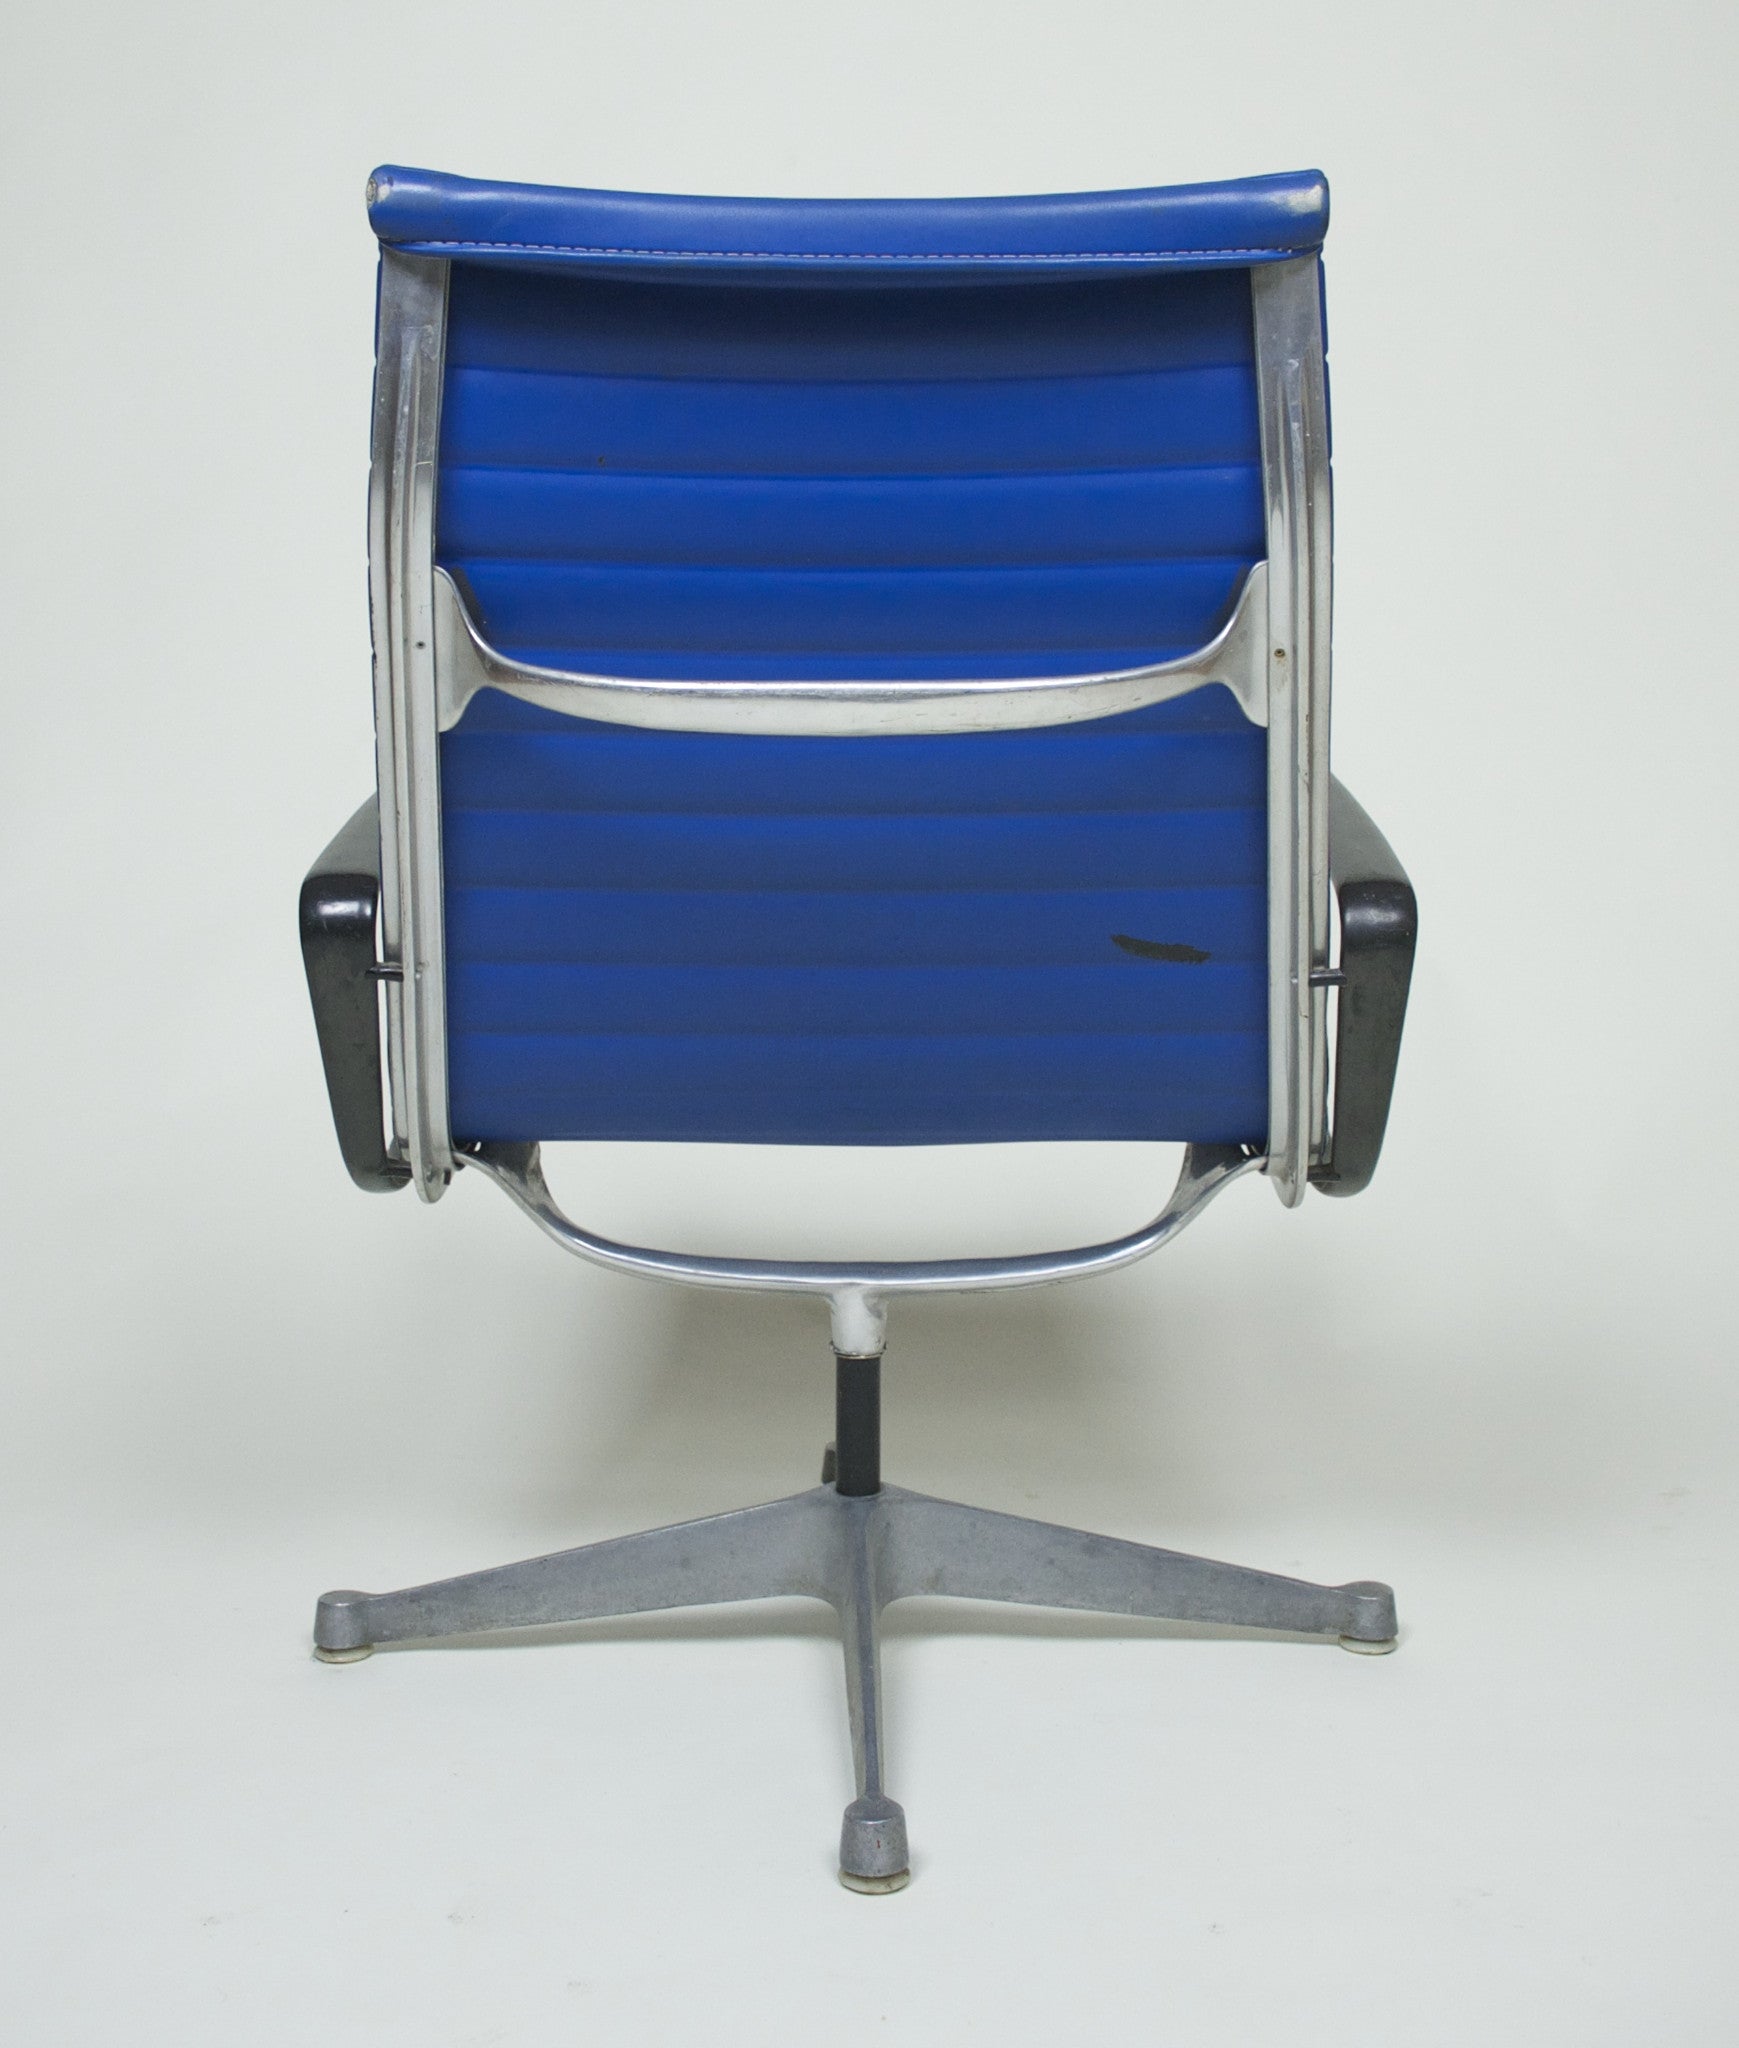 SOLD Eames Herman Miller Aluminum Group Lounge Chair, Near Mint and Blue